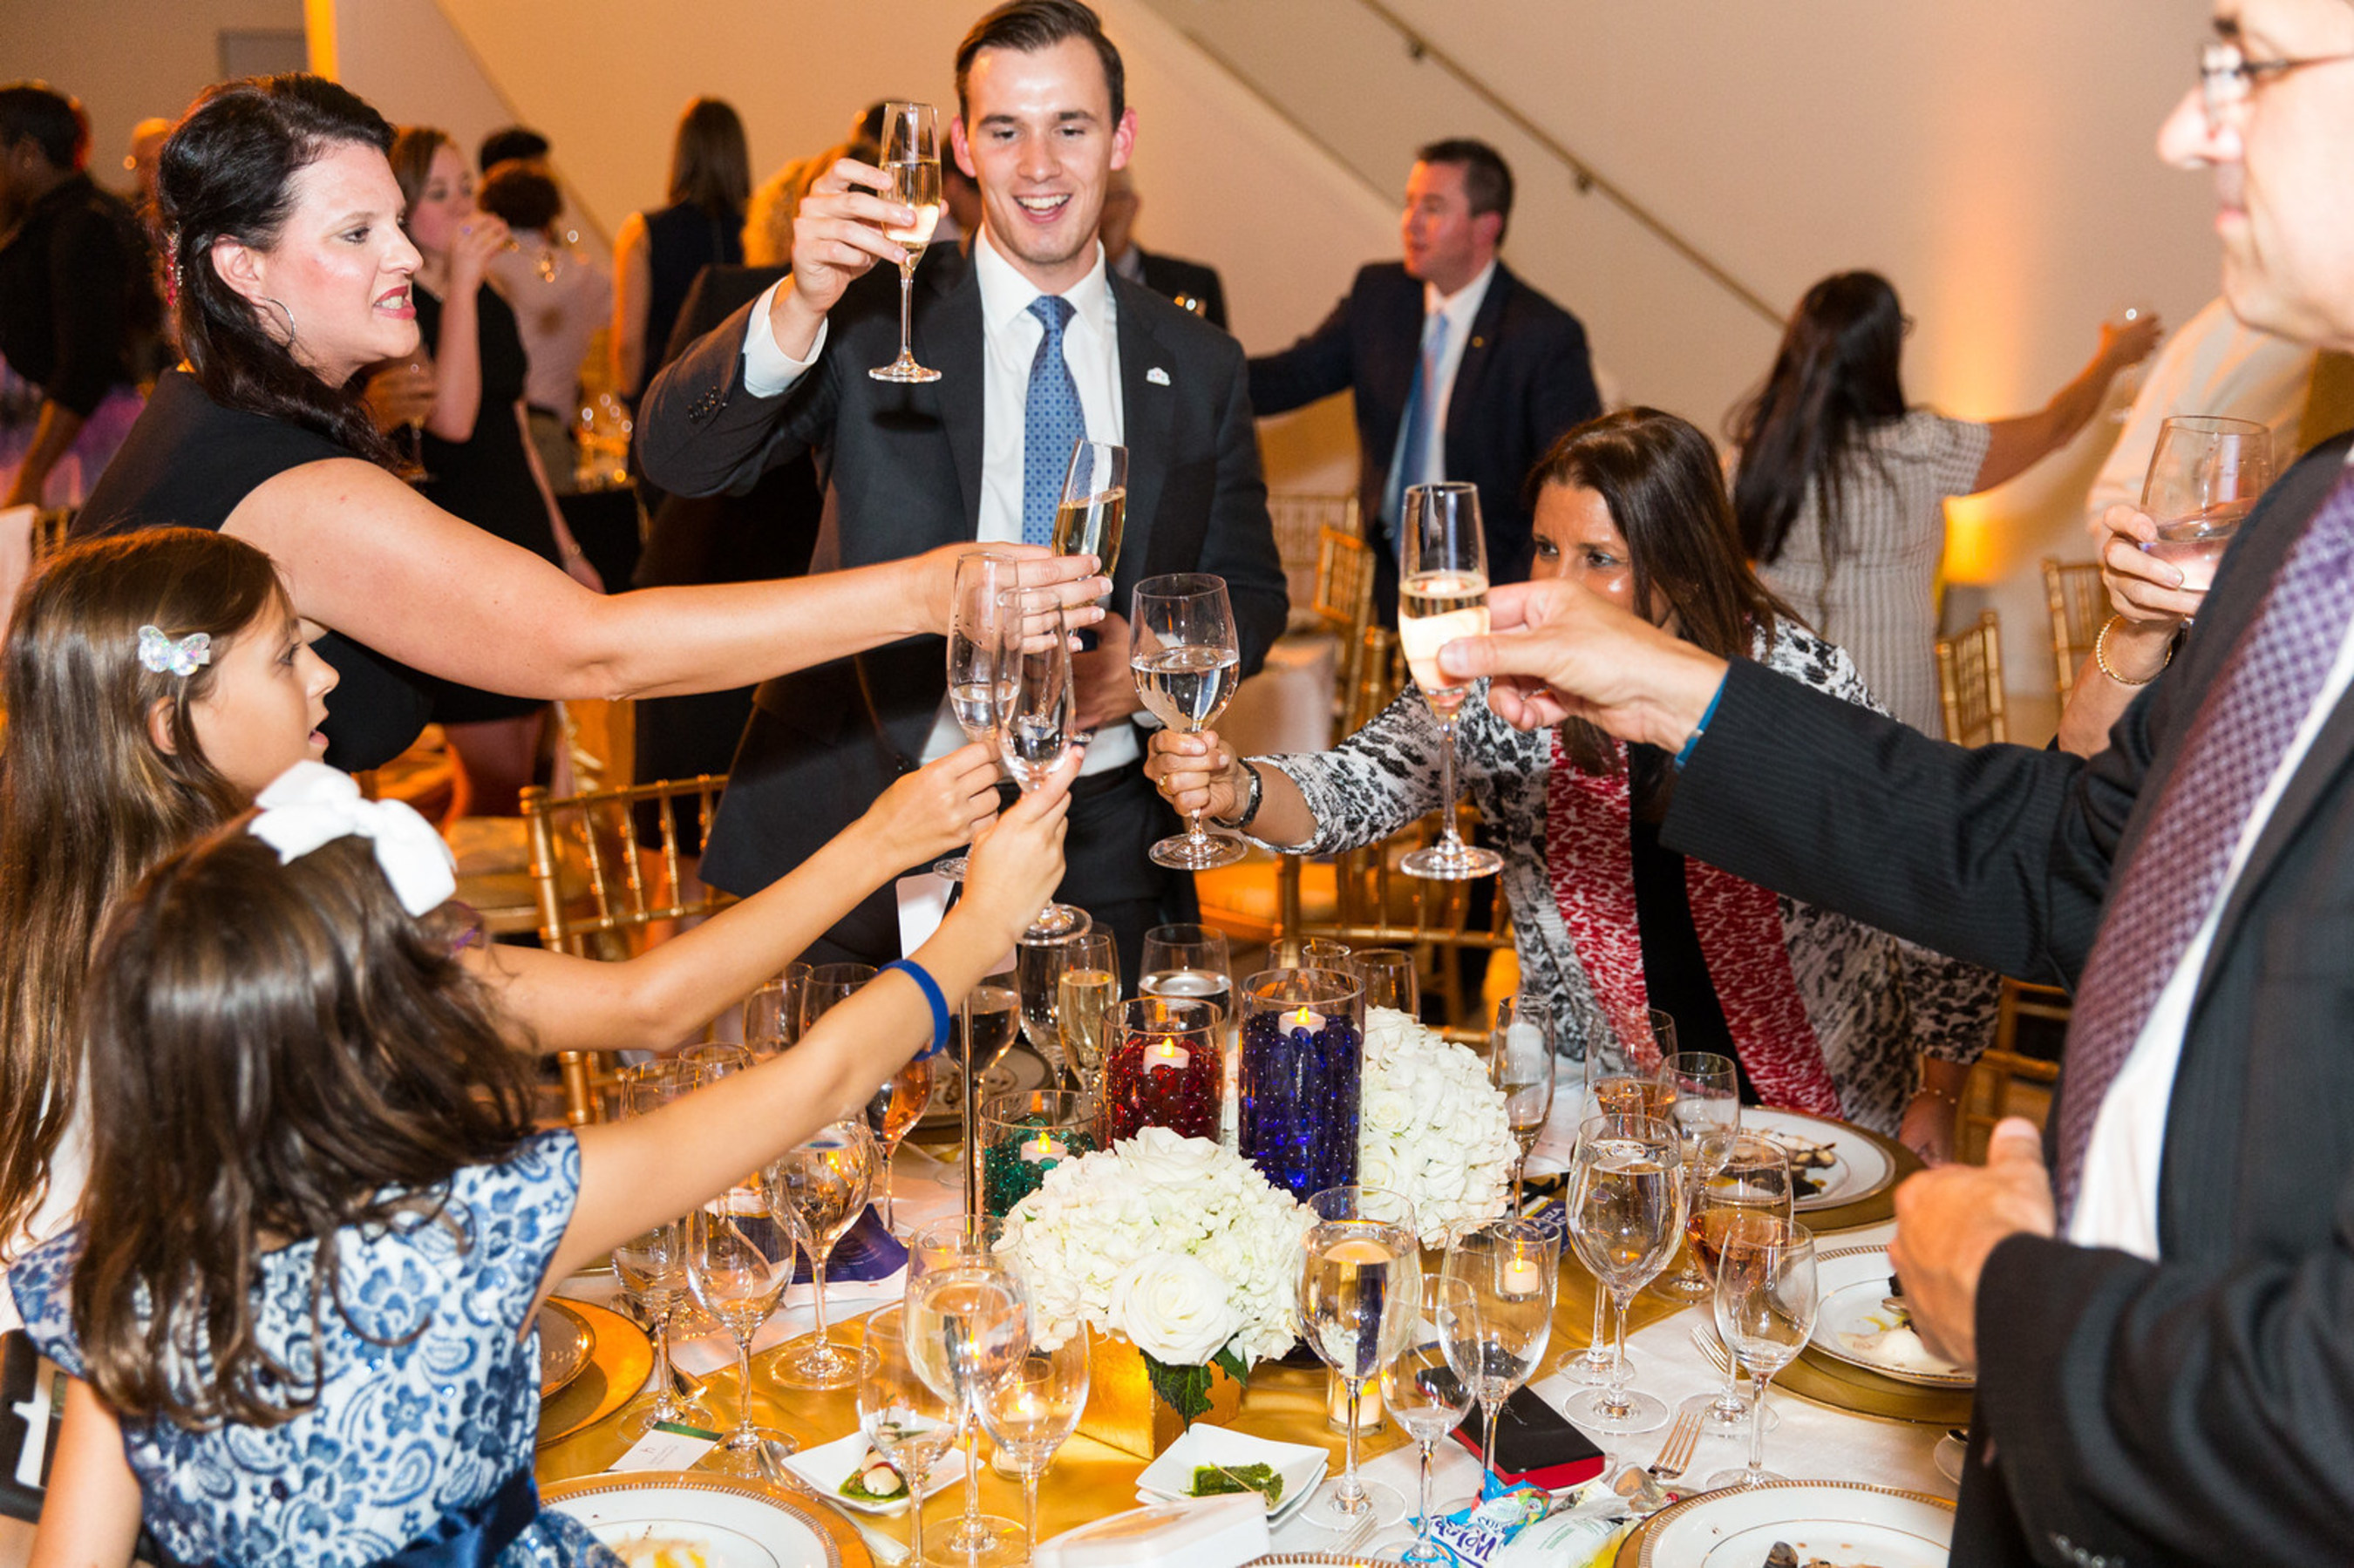 Gala Attendees Participate in the Traditional Champagne (and water) Toast